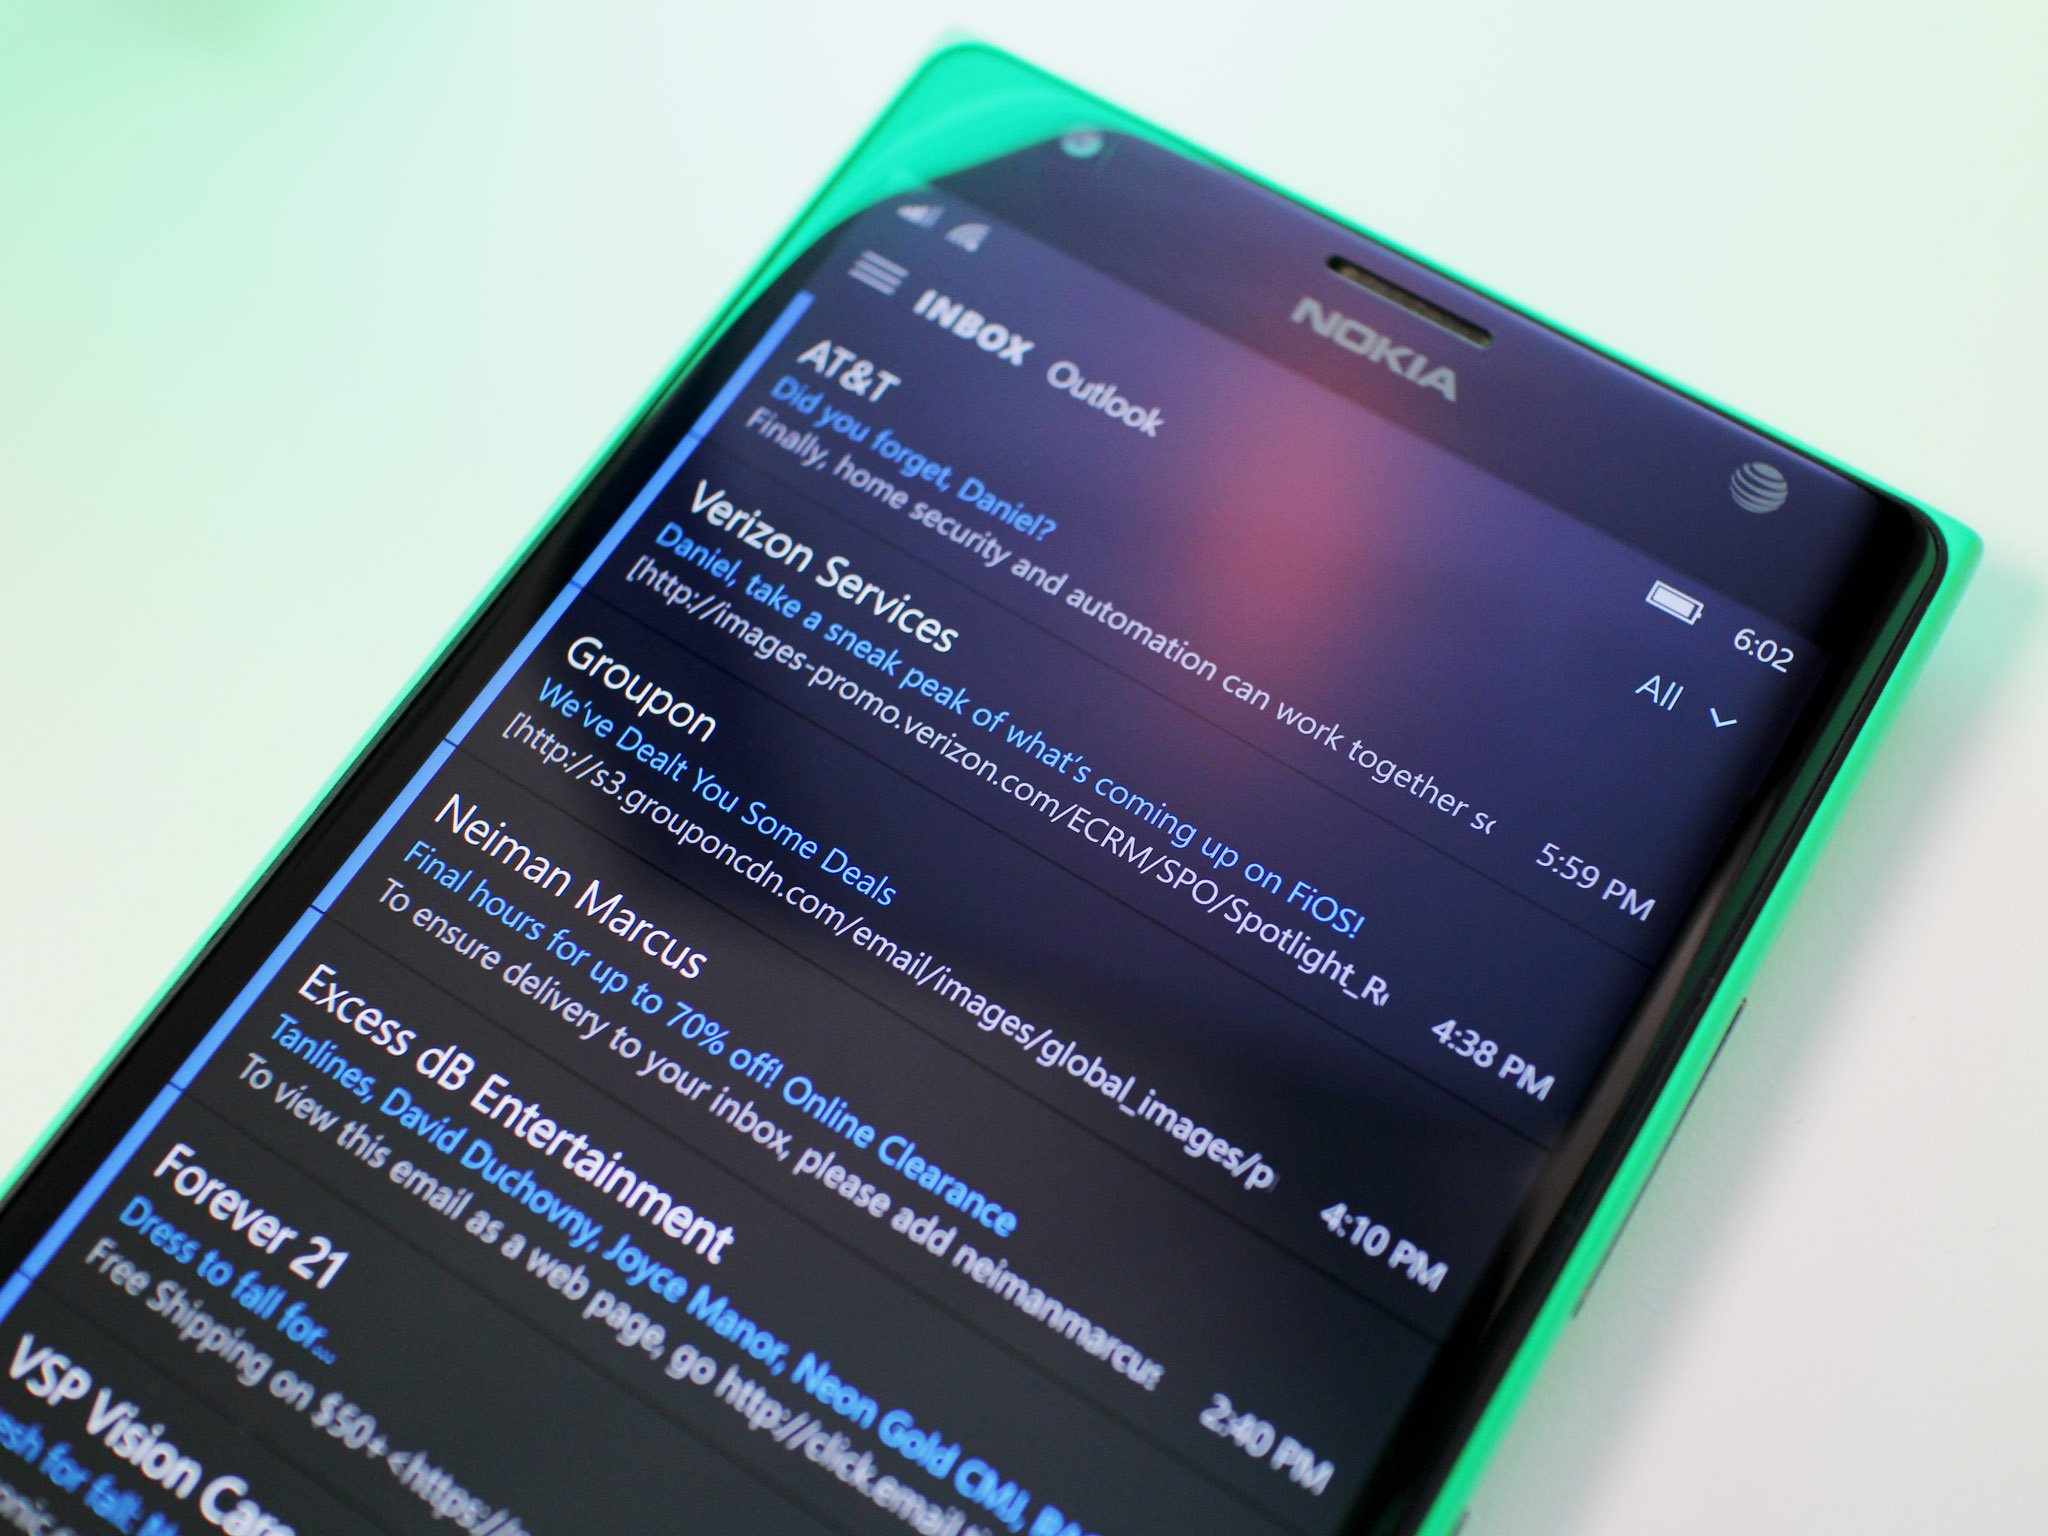 Outlook Mail and Calendar nabs dark theme, new personalization options in Windows 10 Mobile